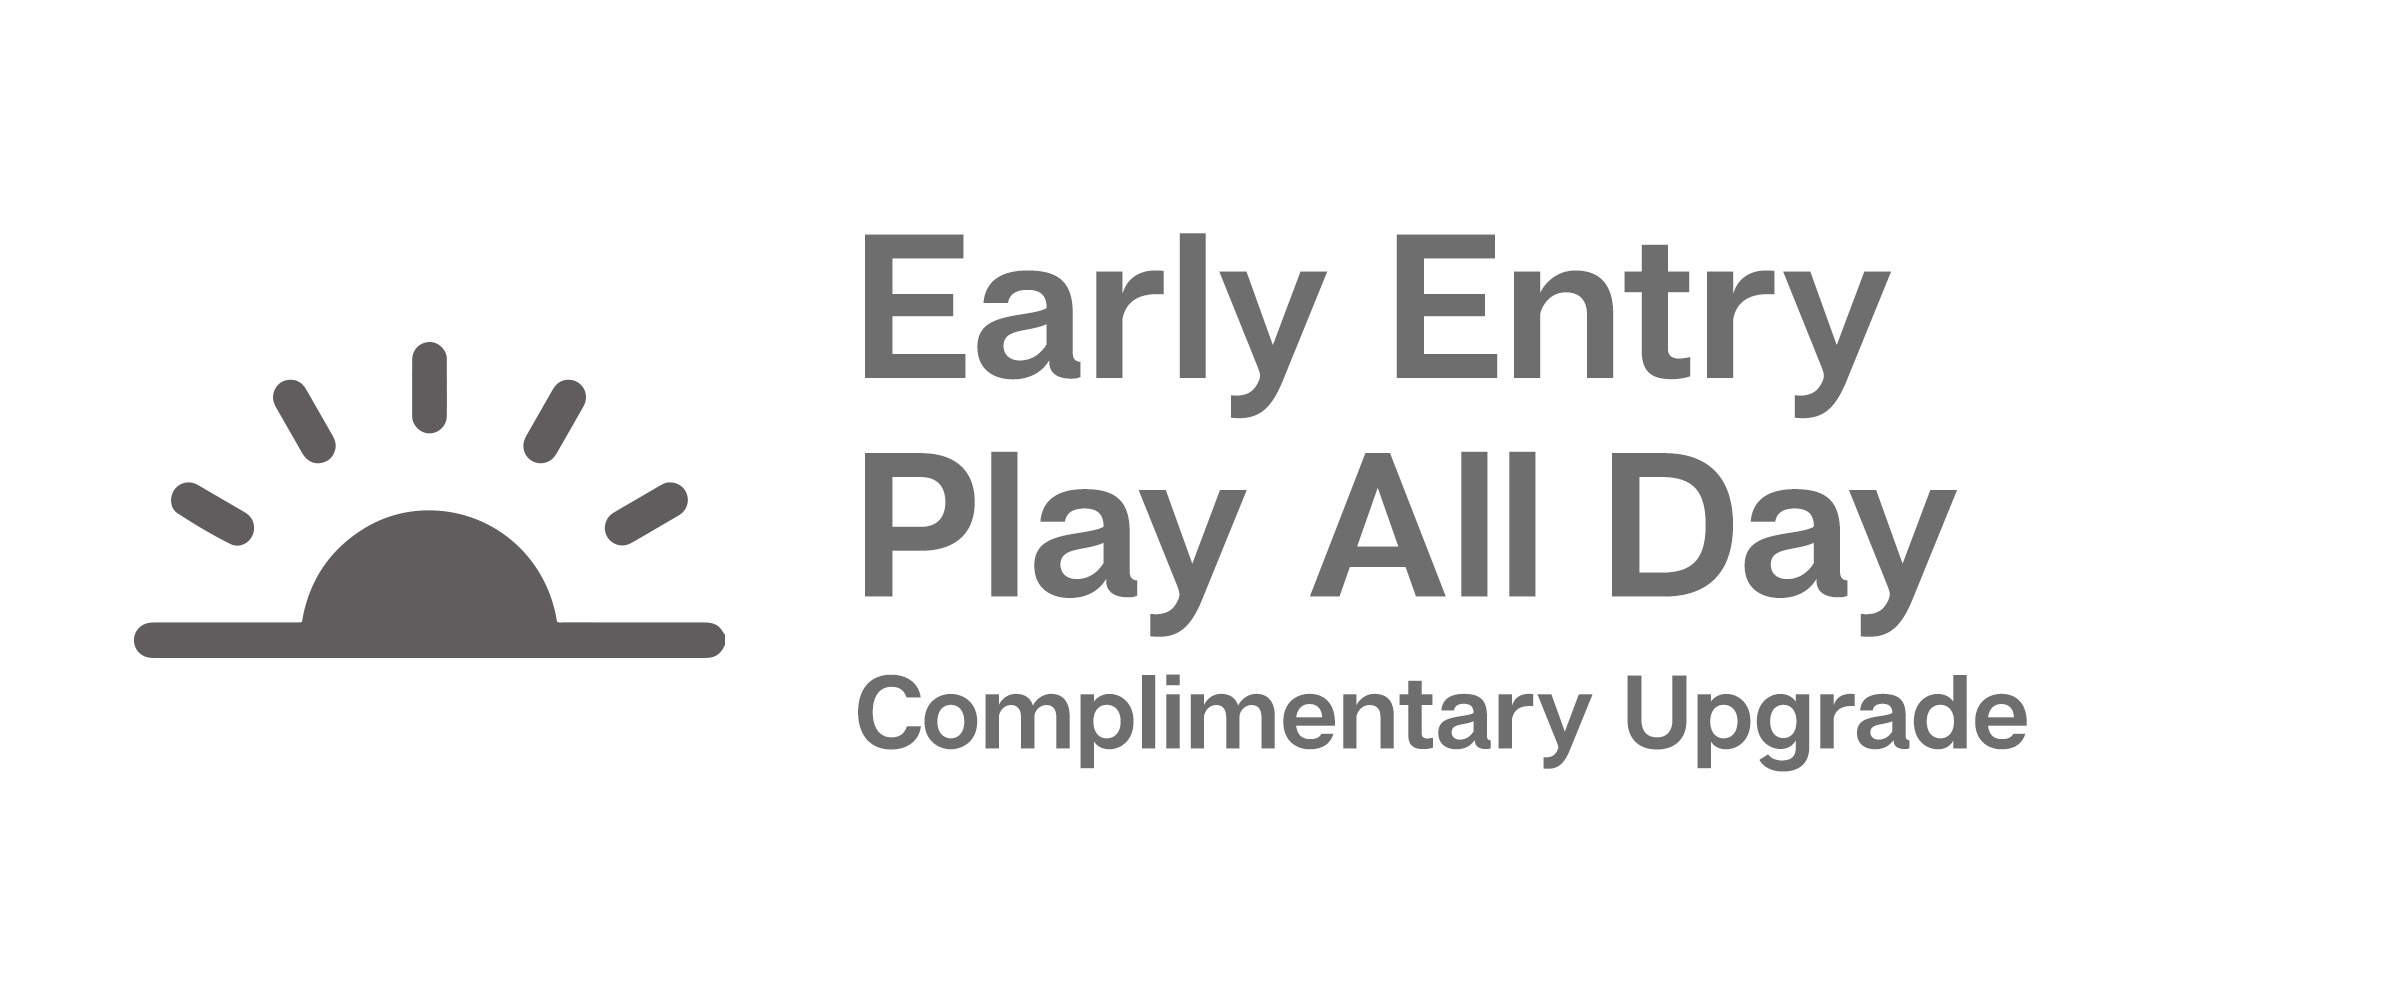 Early Entry Play All Day (Complementary Upgrade)